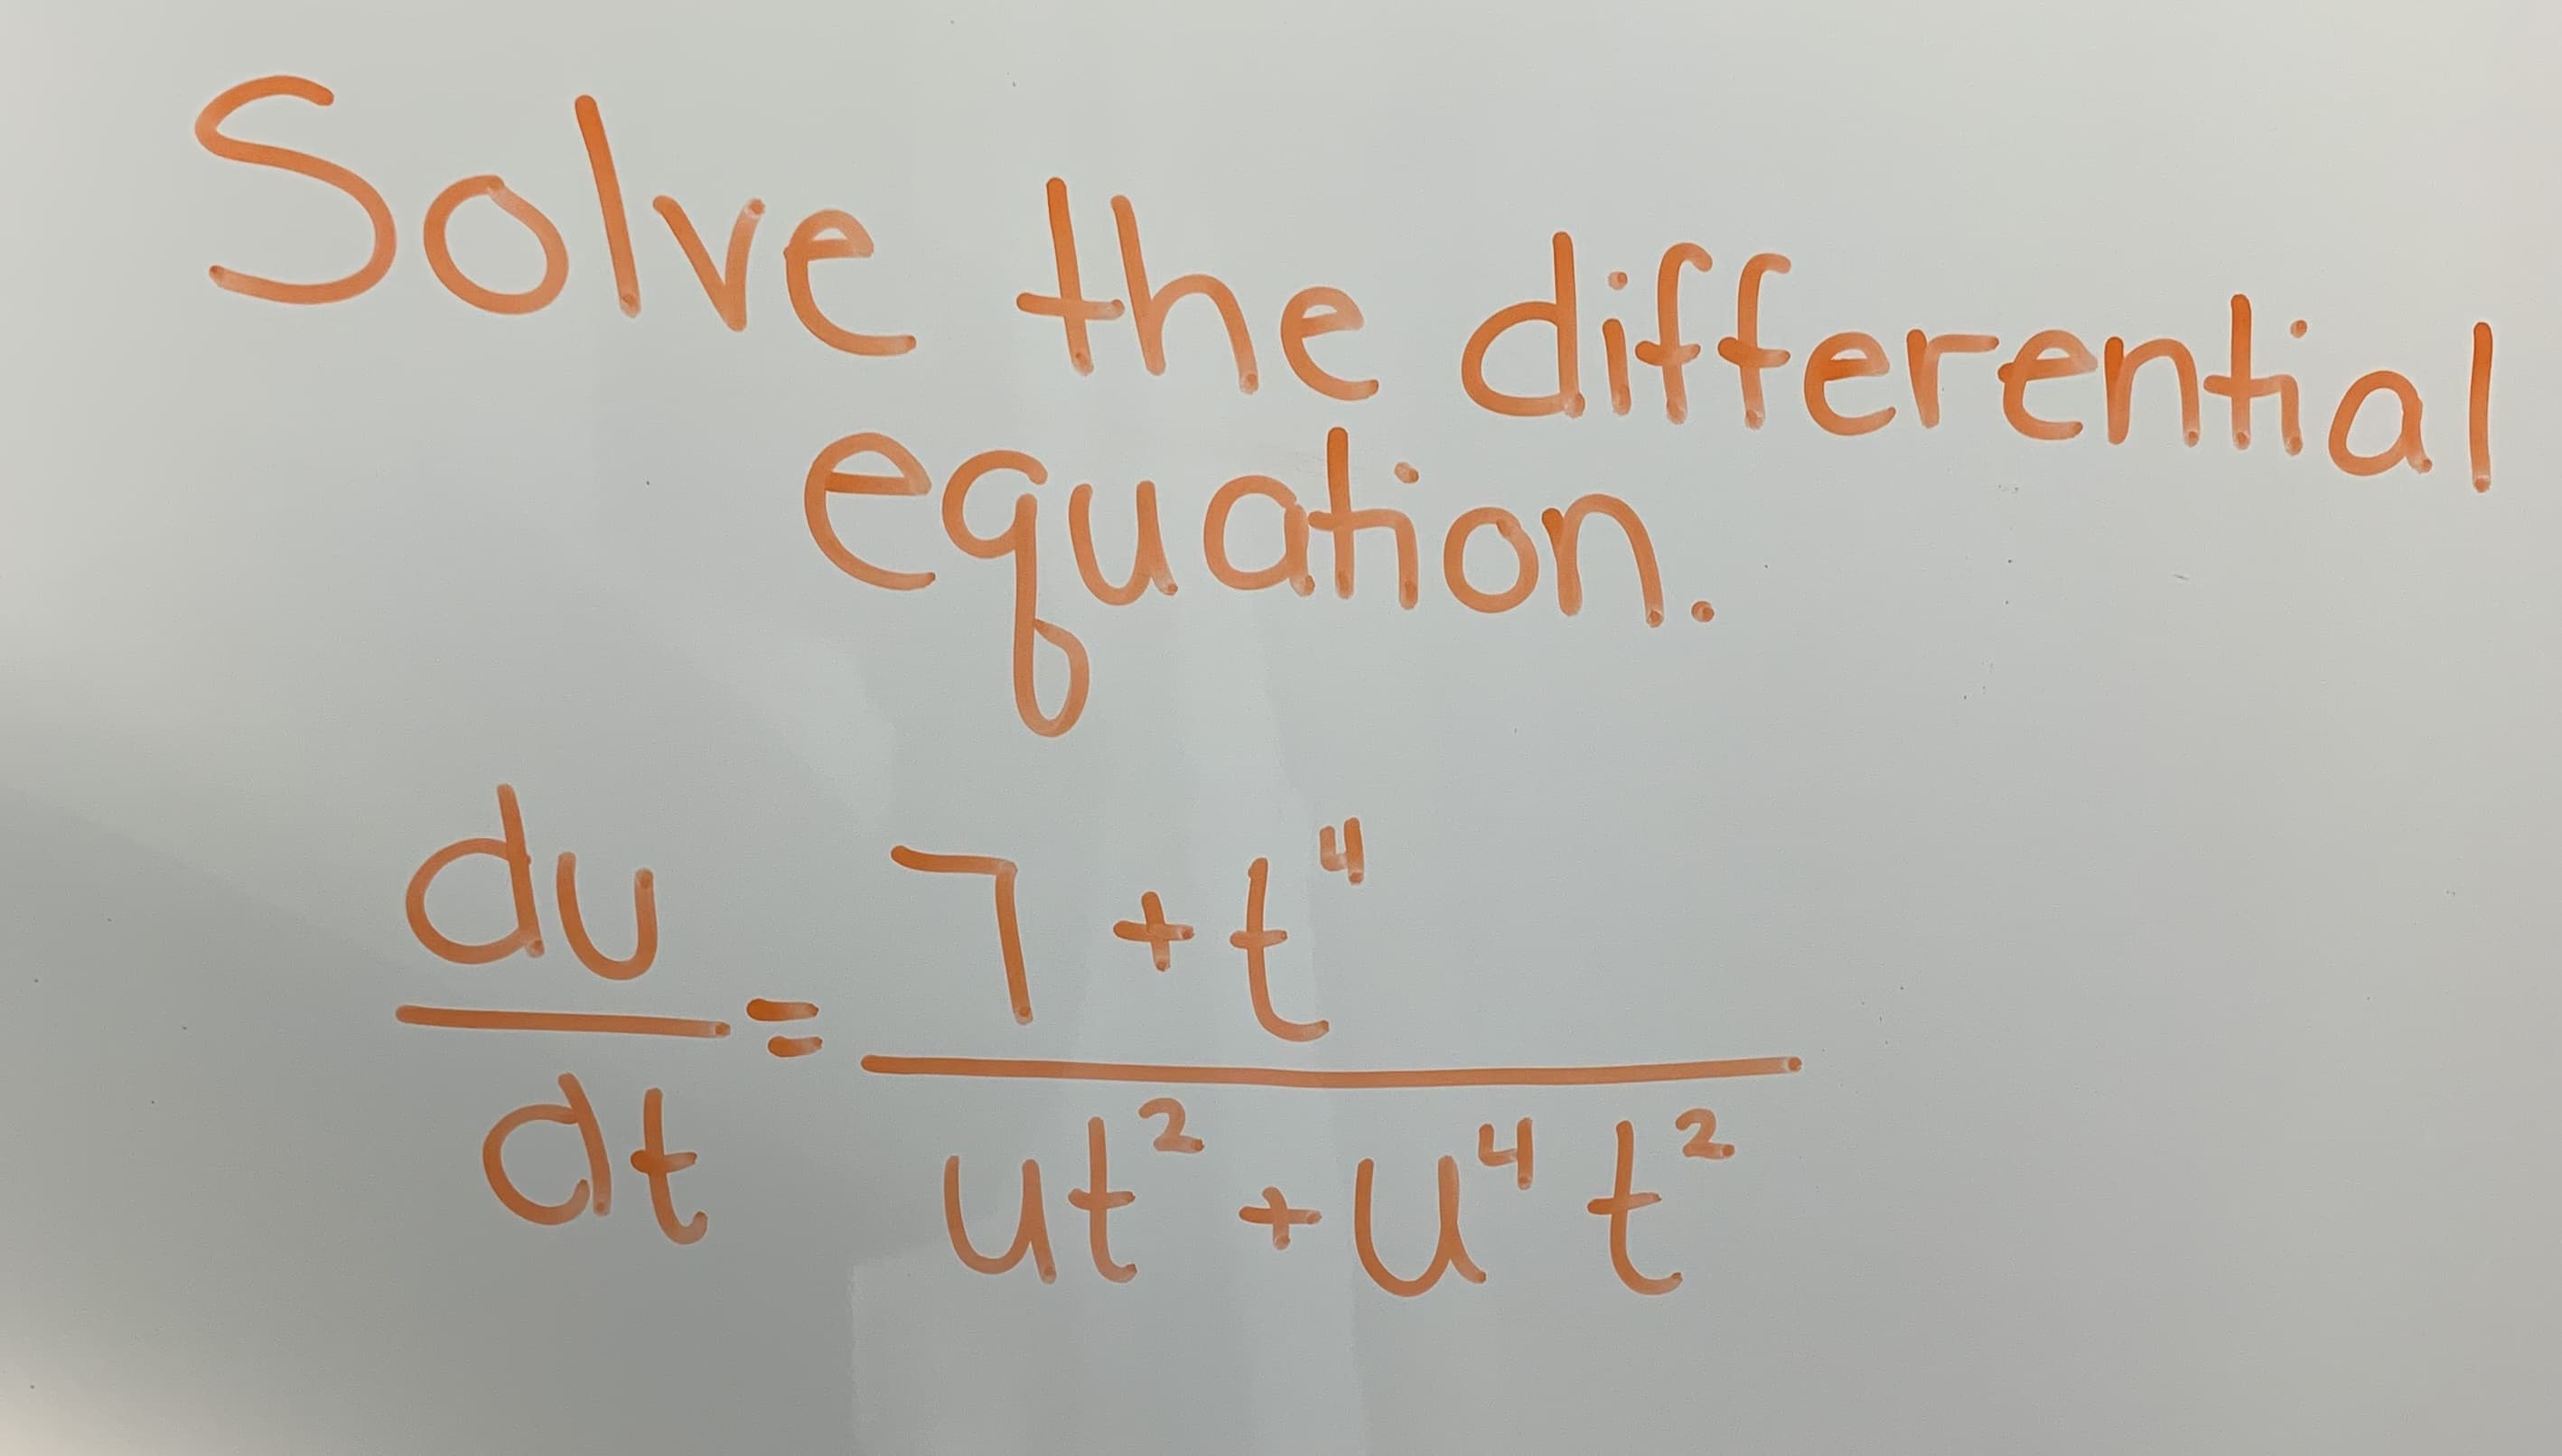 olve The differential
equation
at ut+ut
